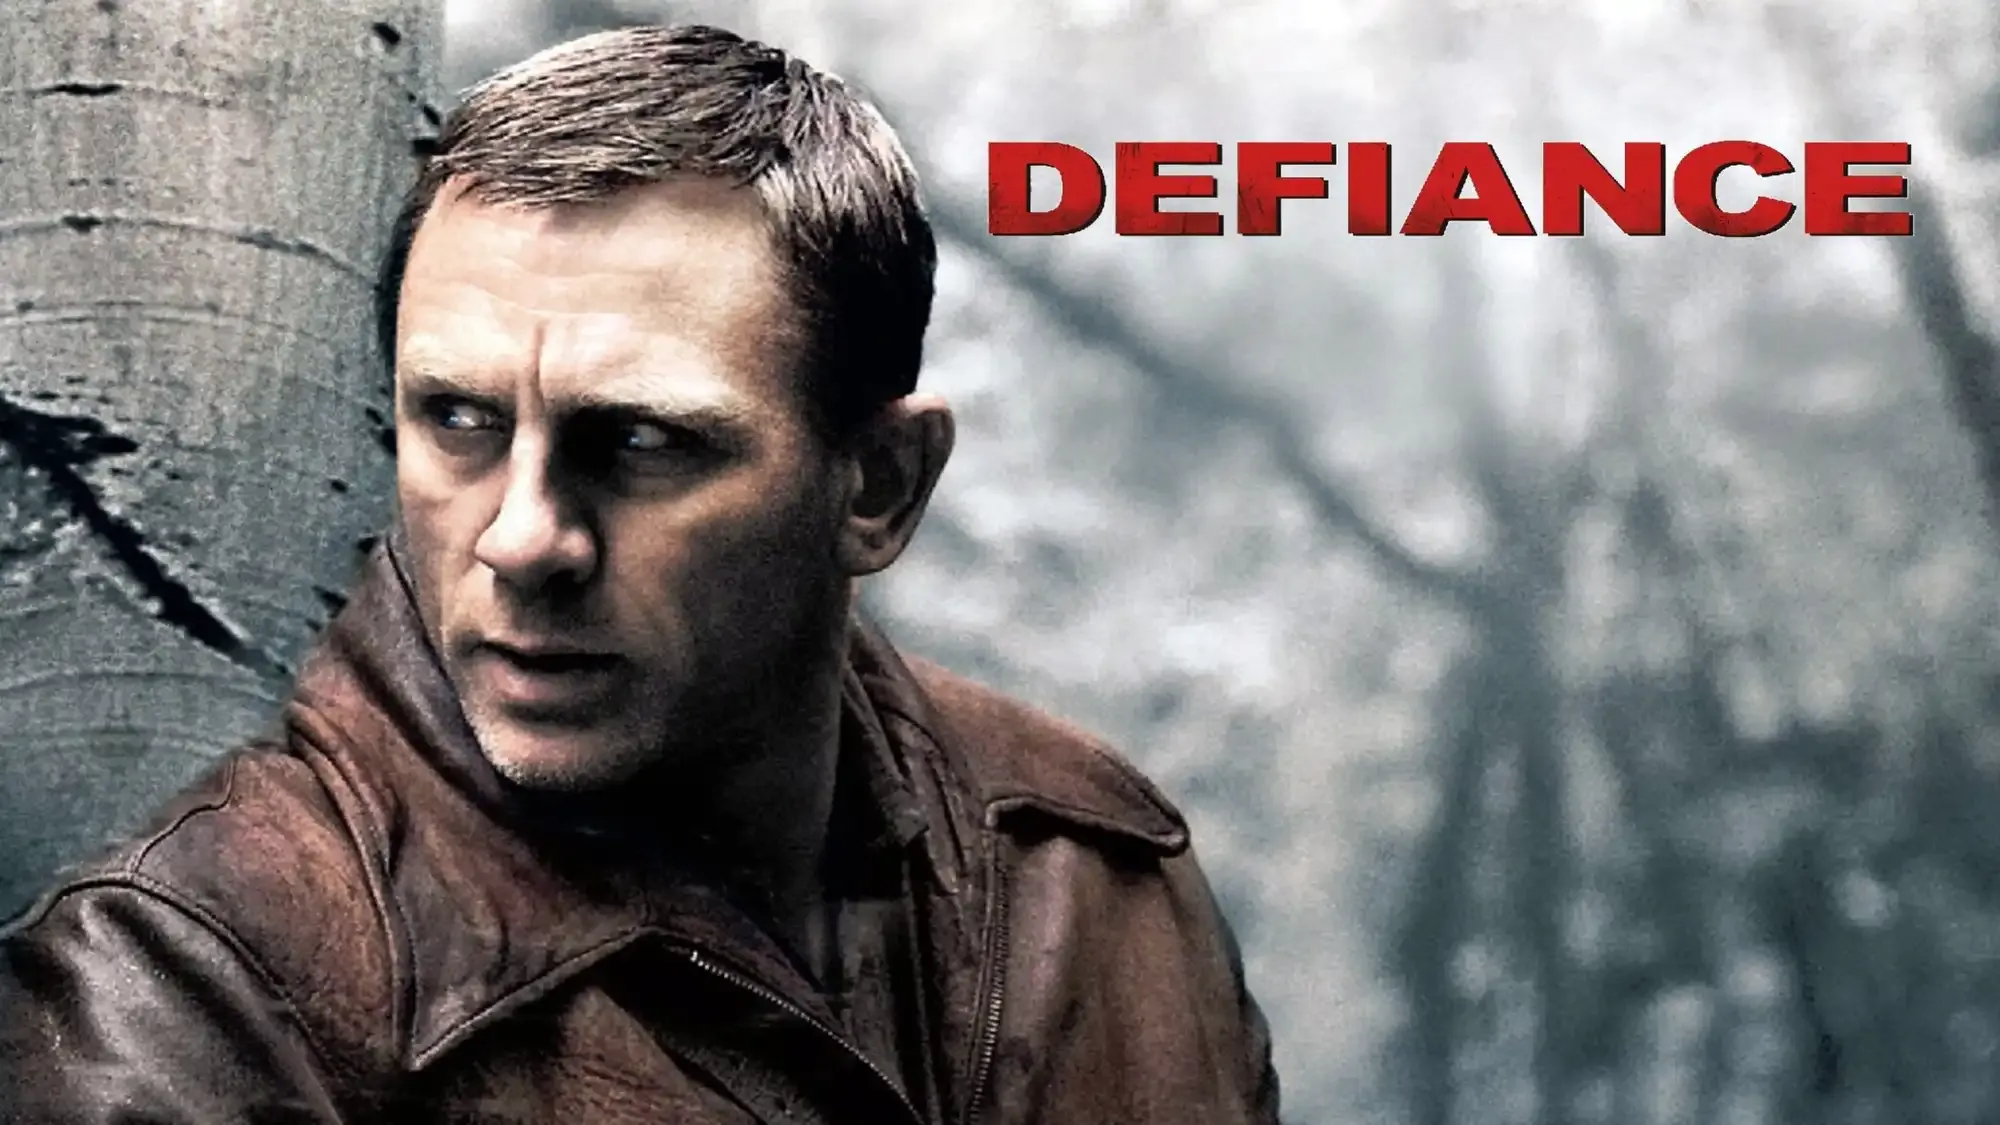 Defiance movie review